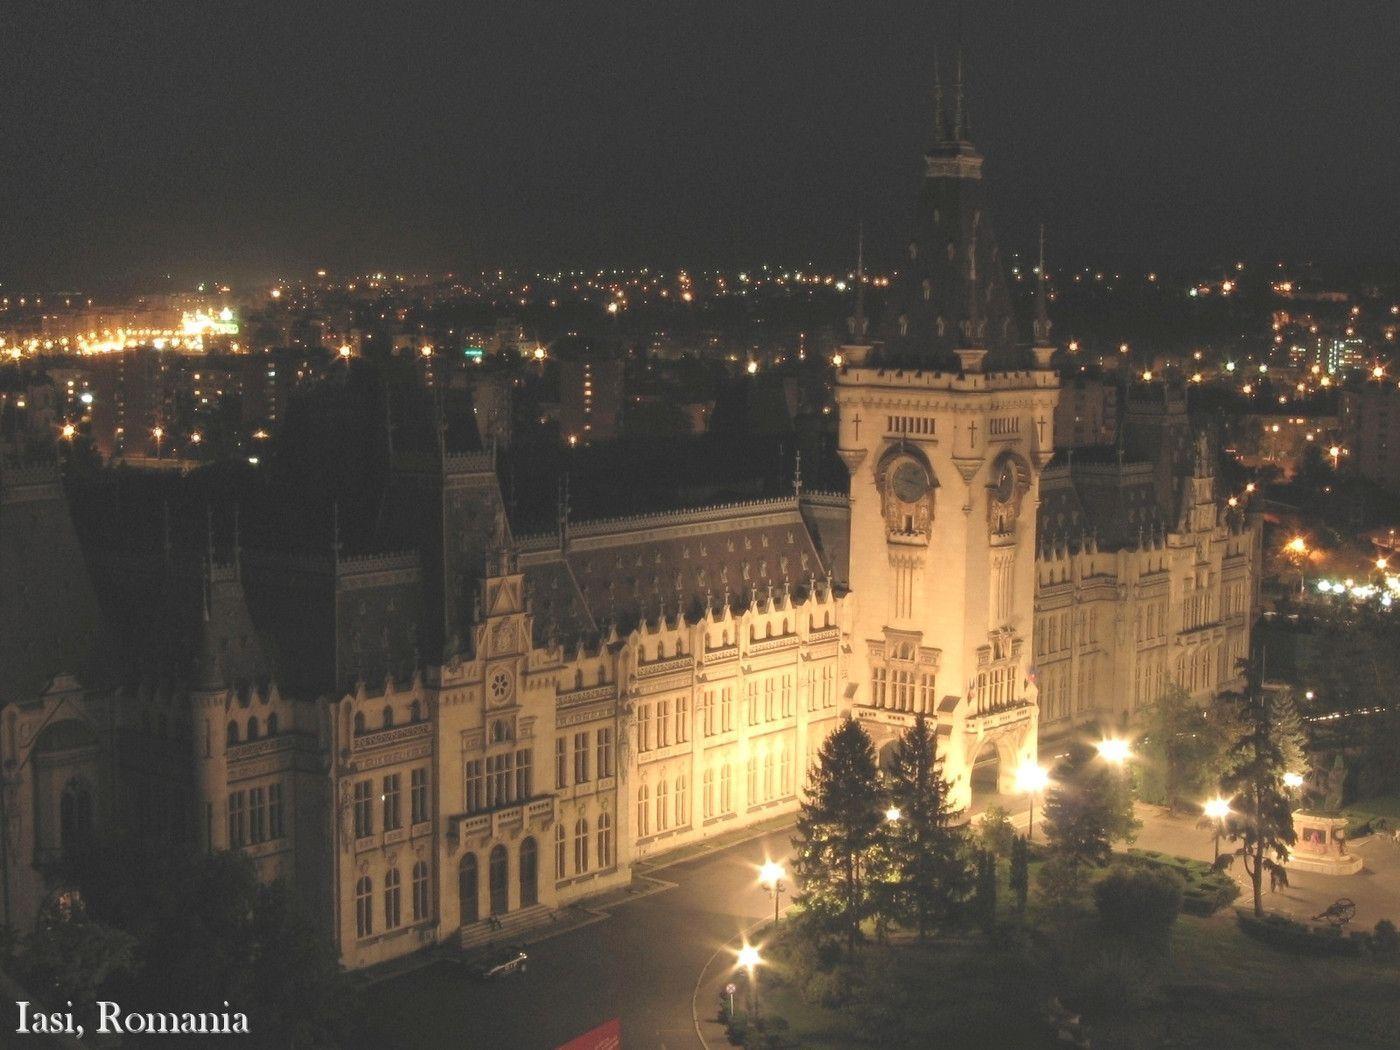 Iasi Romania palace of culture at night architecture photo